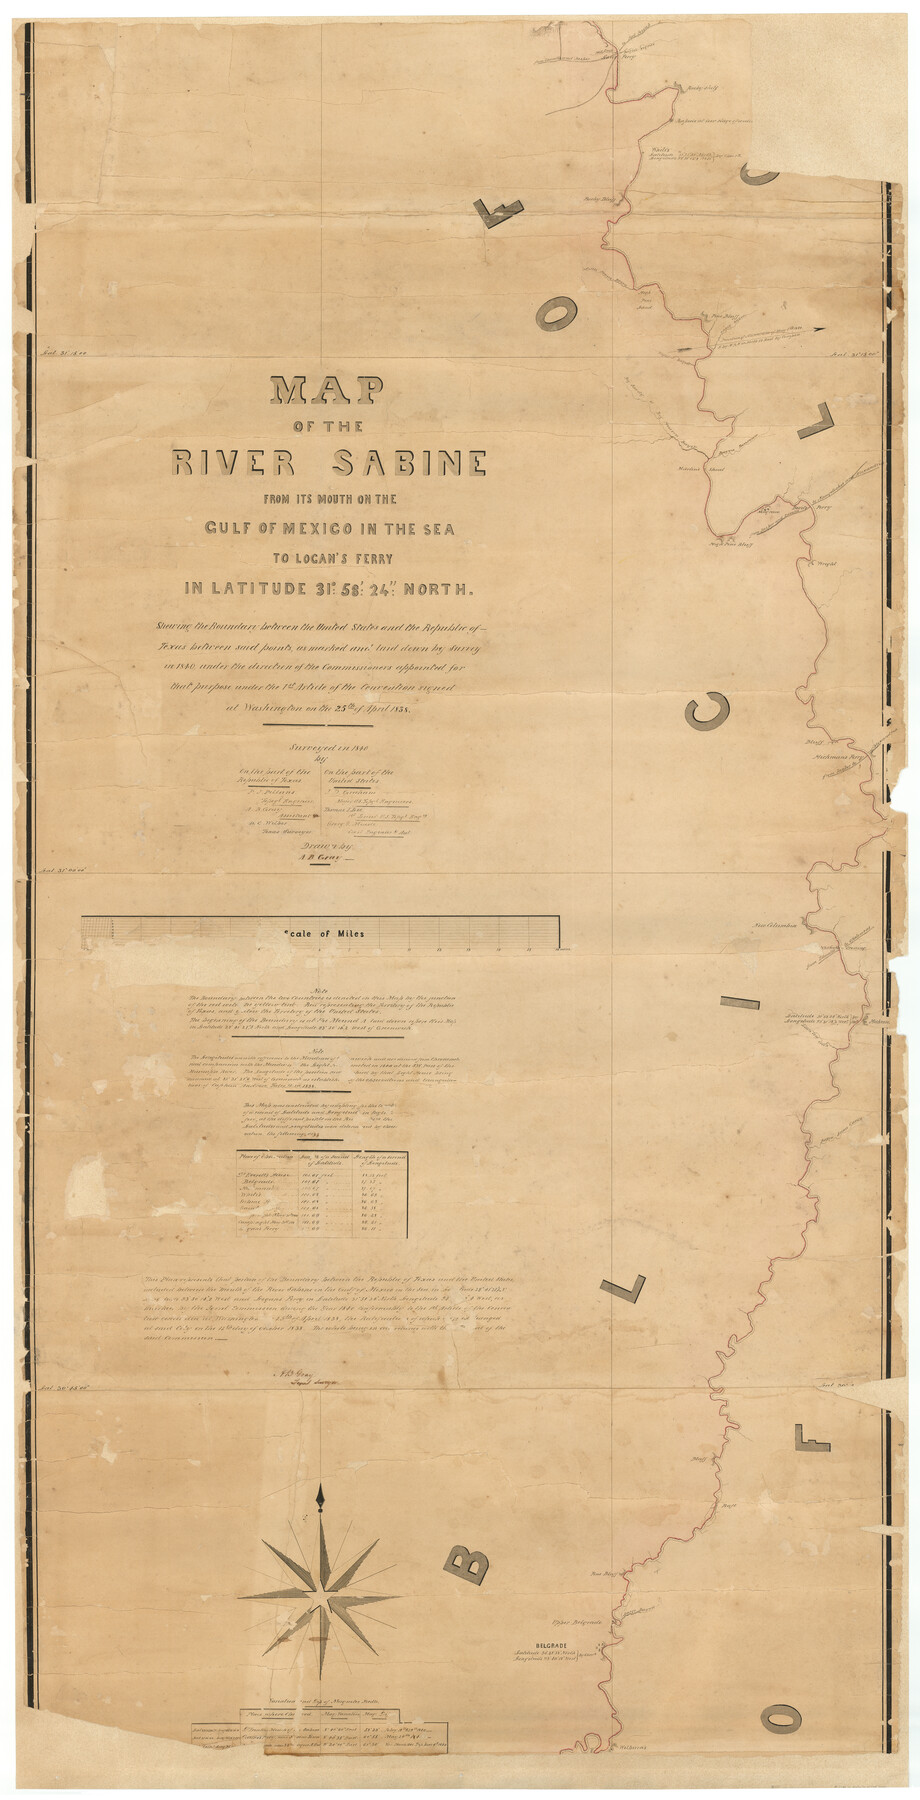 87151, Map of the River Sabine from its mouth on the Gulf of Mexico in the Sea to Logan's Ferry in Latitude 31°58'24" North, General Map Collection